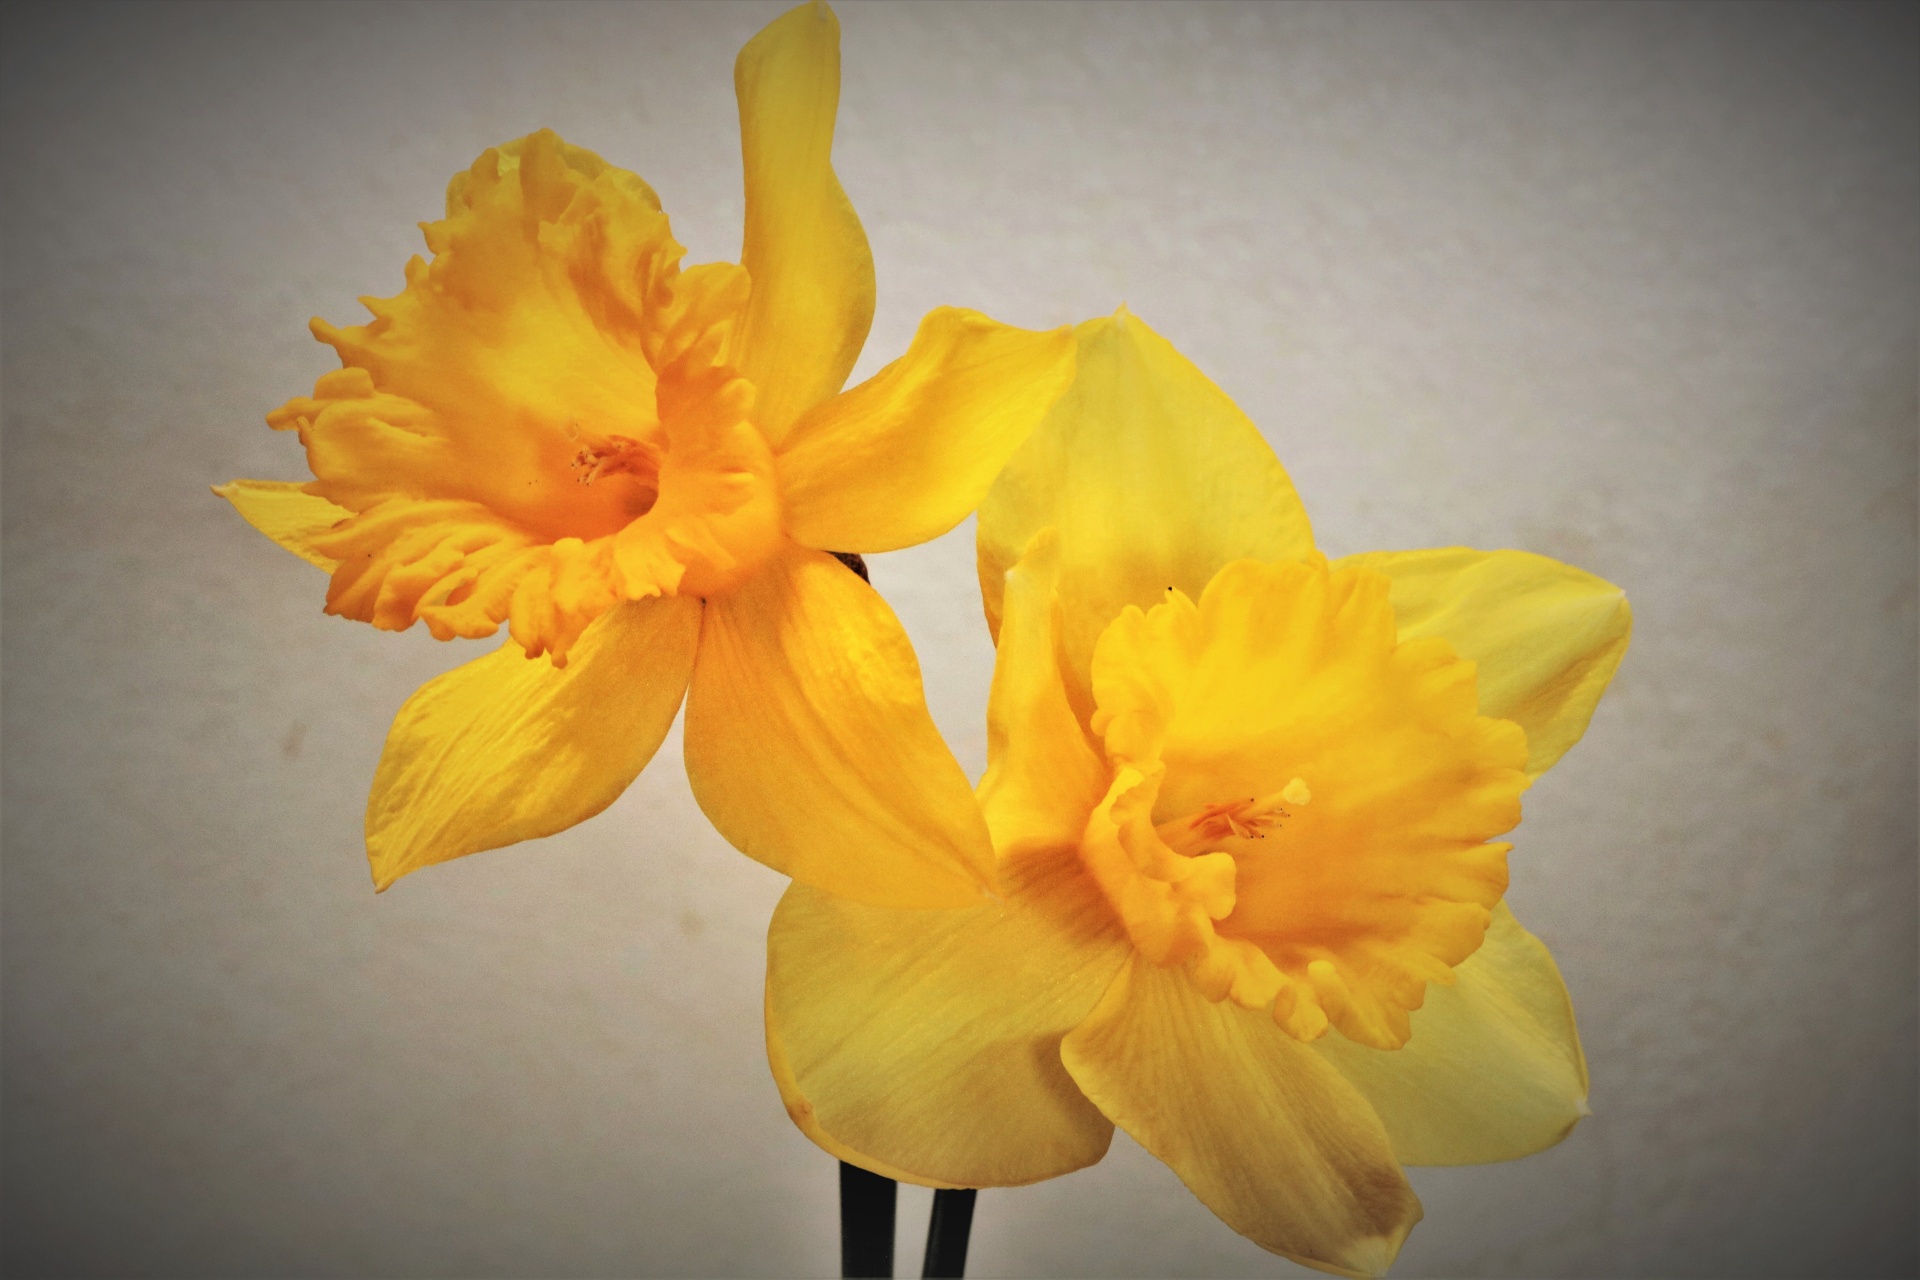 Close-up of two yellow daffodil blooms on a light gray background.